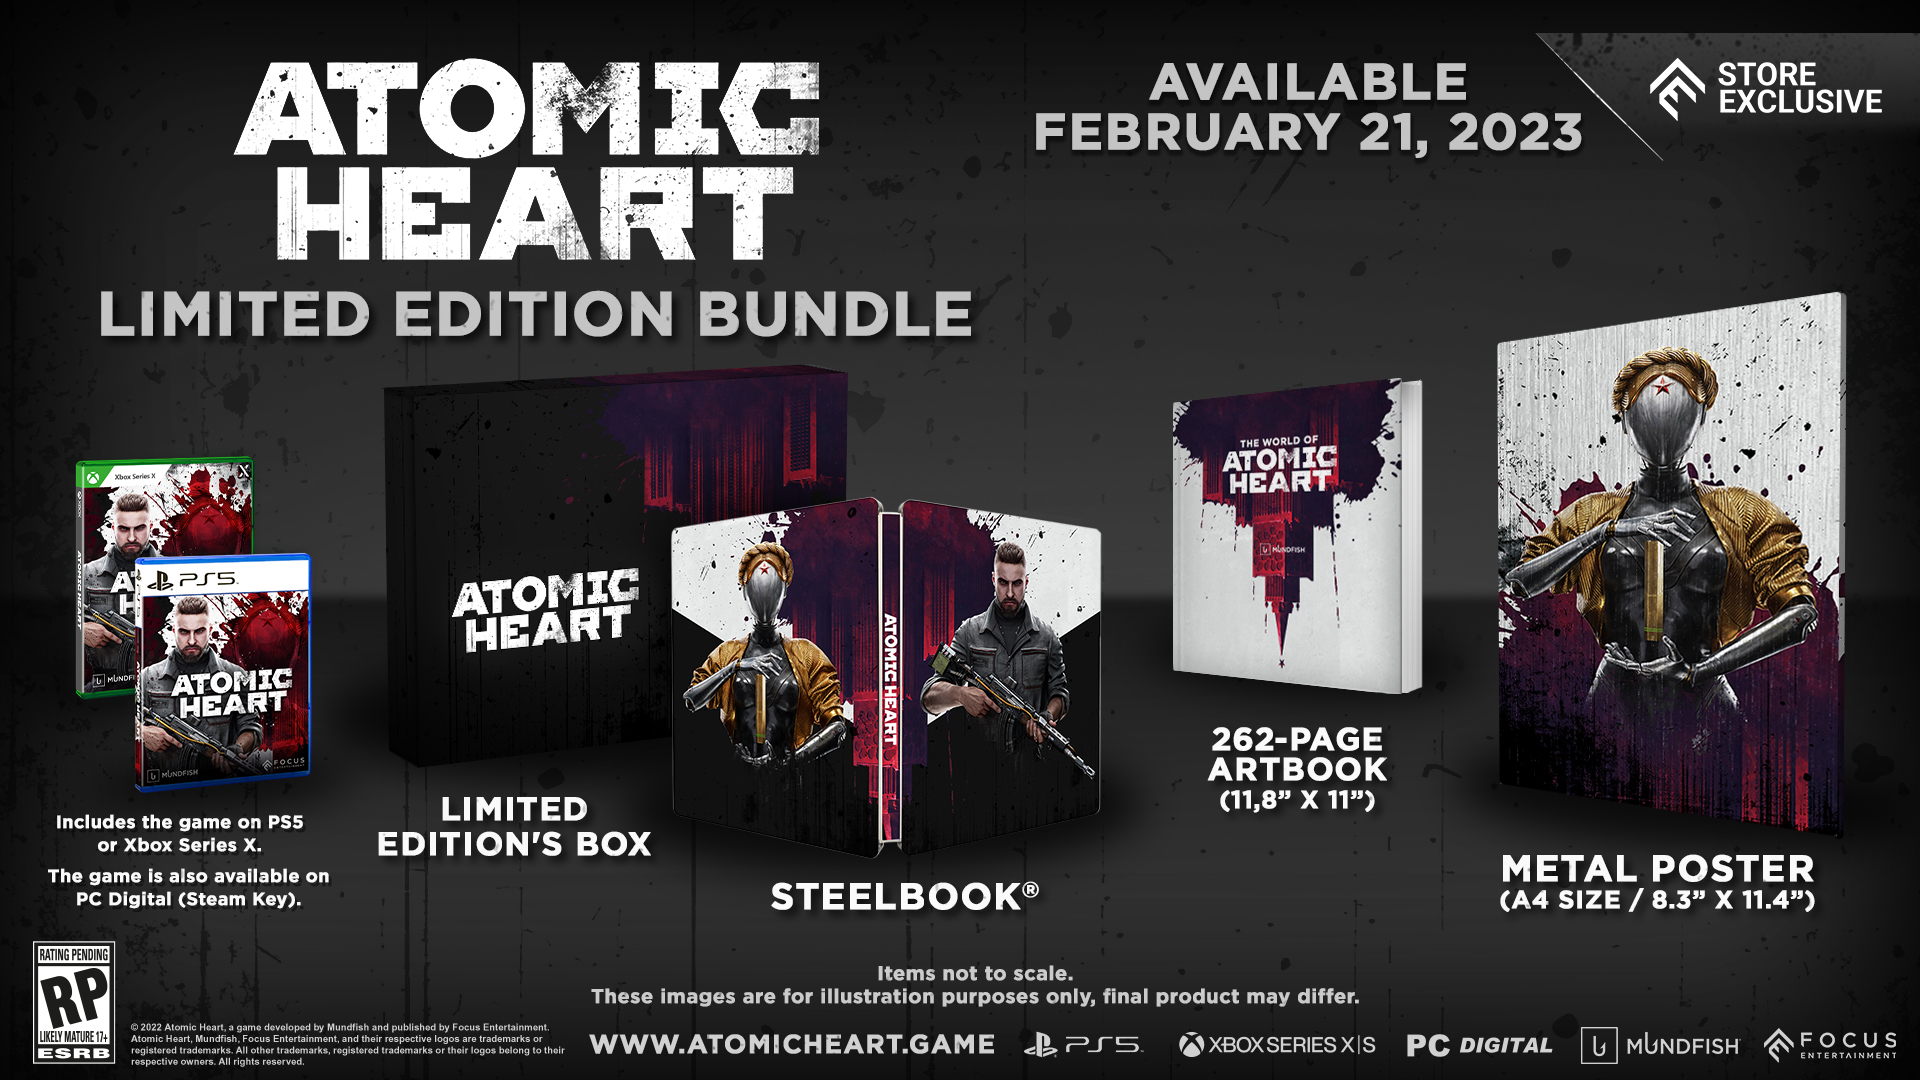 Atomic Heart Standard Edition PlayStation 5 - Best Buy